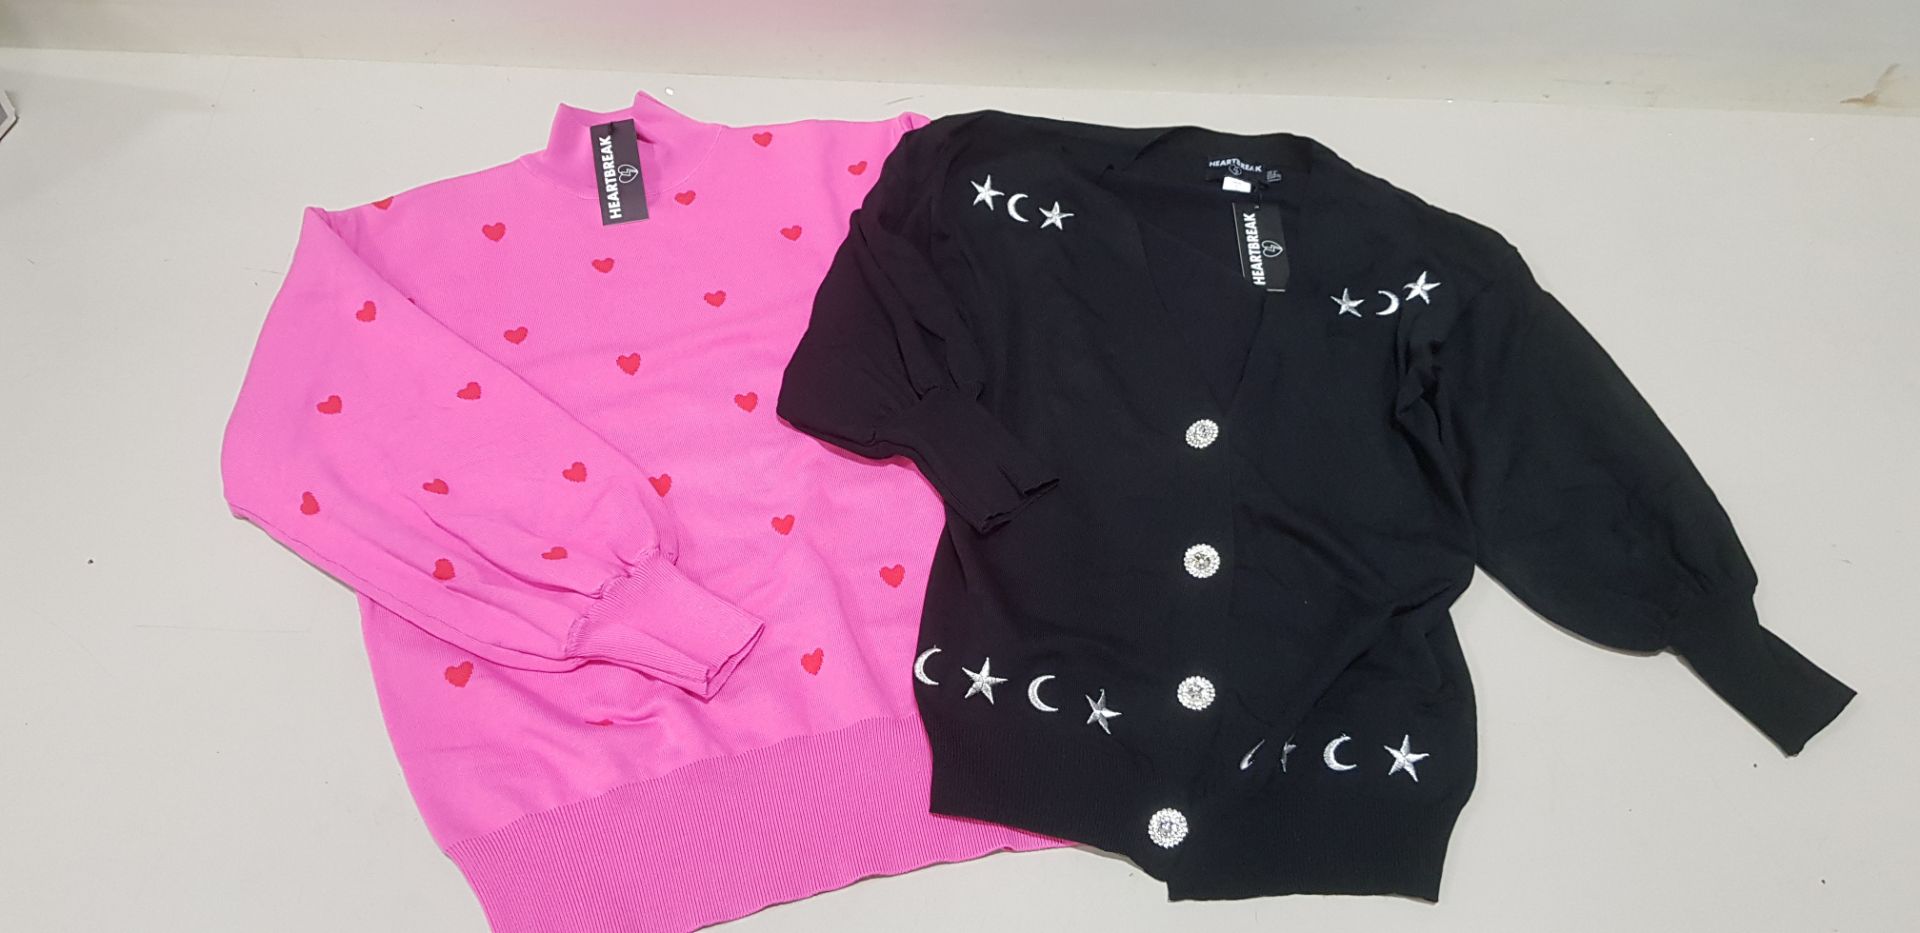 30 PIECE MIXED HEARTBREAK CLOTHING LOT CONTAINING PINK HEART TURTLENECK JUMPERS IN SIZE UK 12 AND